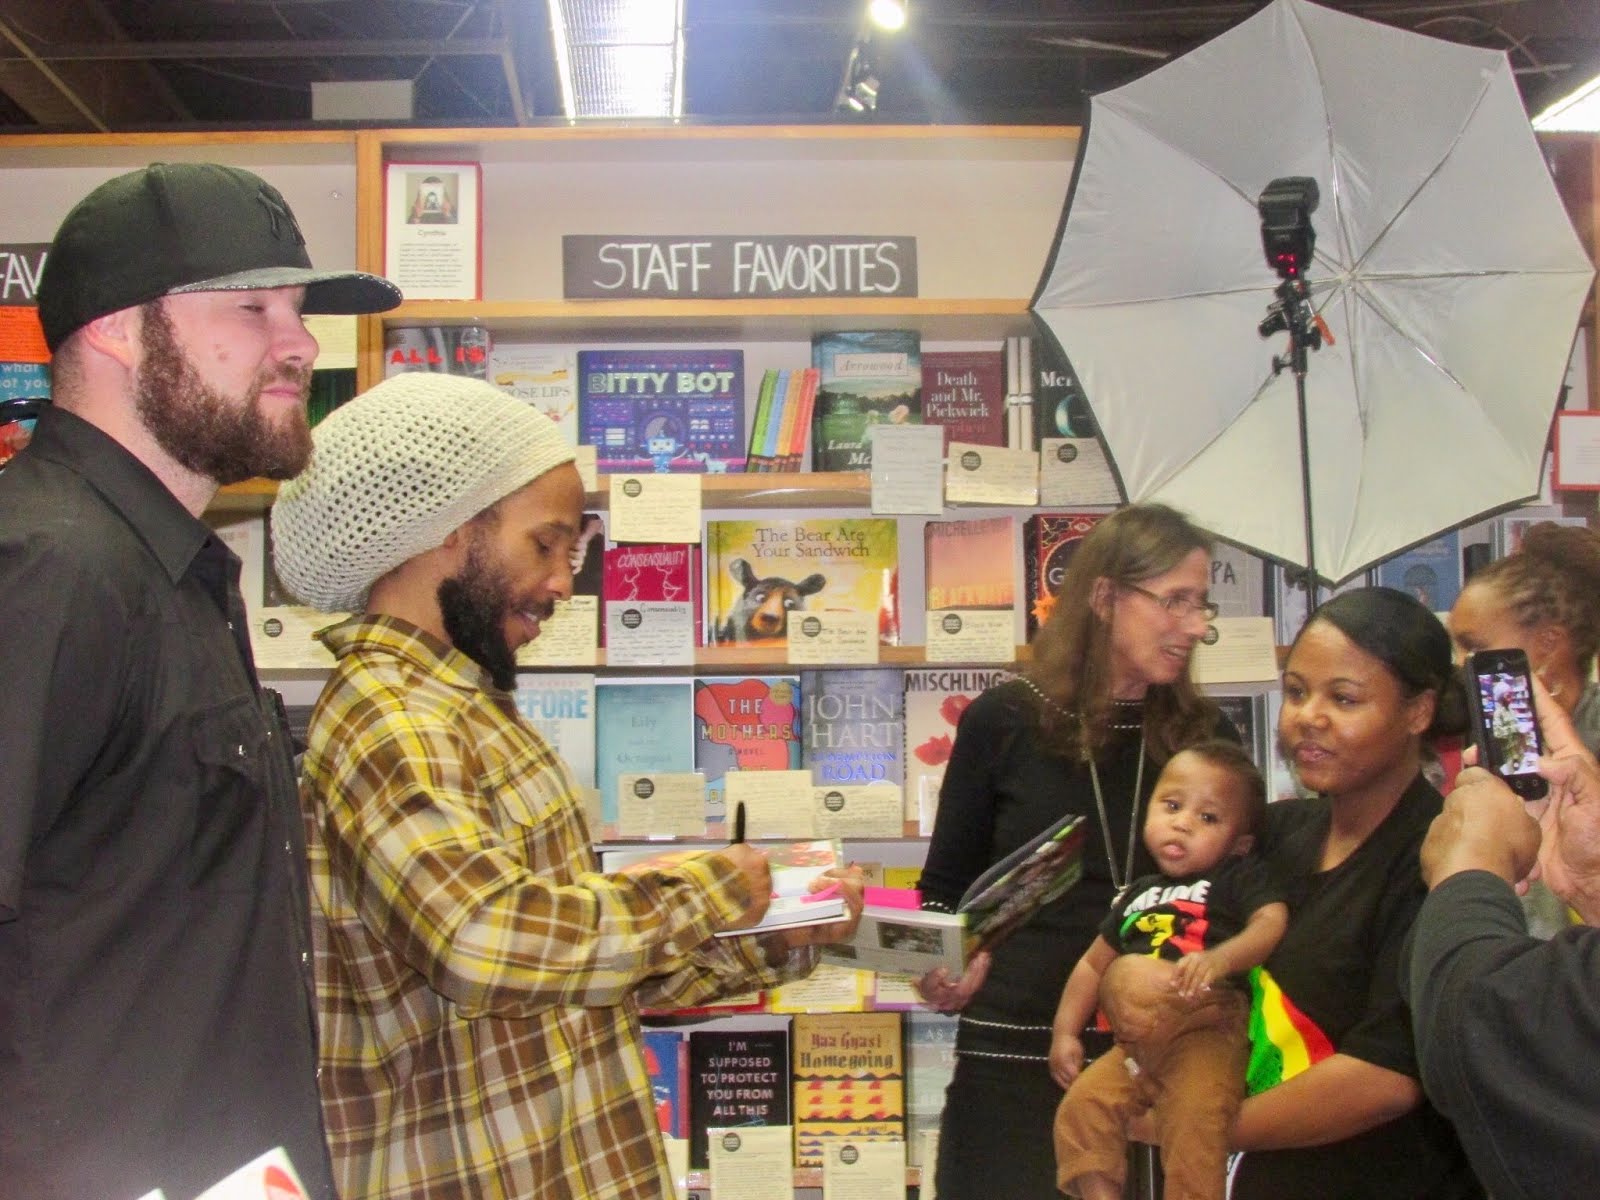 In the Kitchen with Ziggy Marley: Seven-Time Grammy Winner Launches Family Cook Book in Menlo Park,